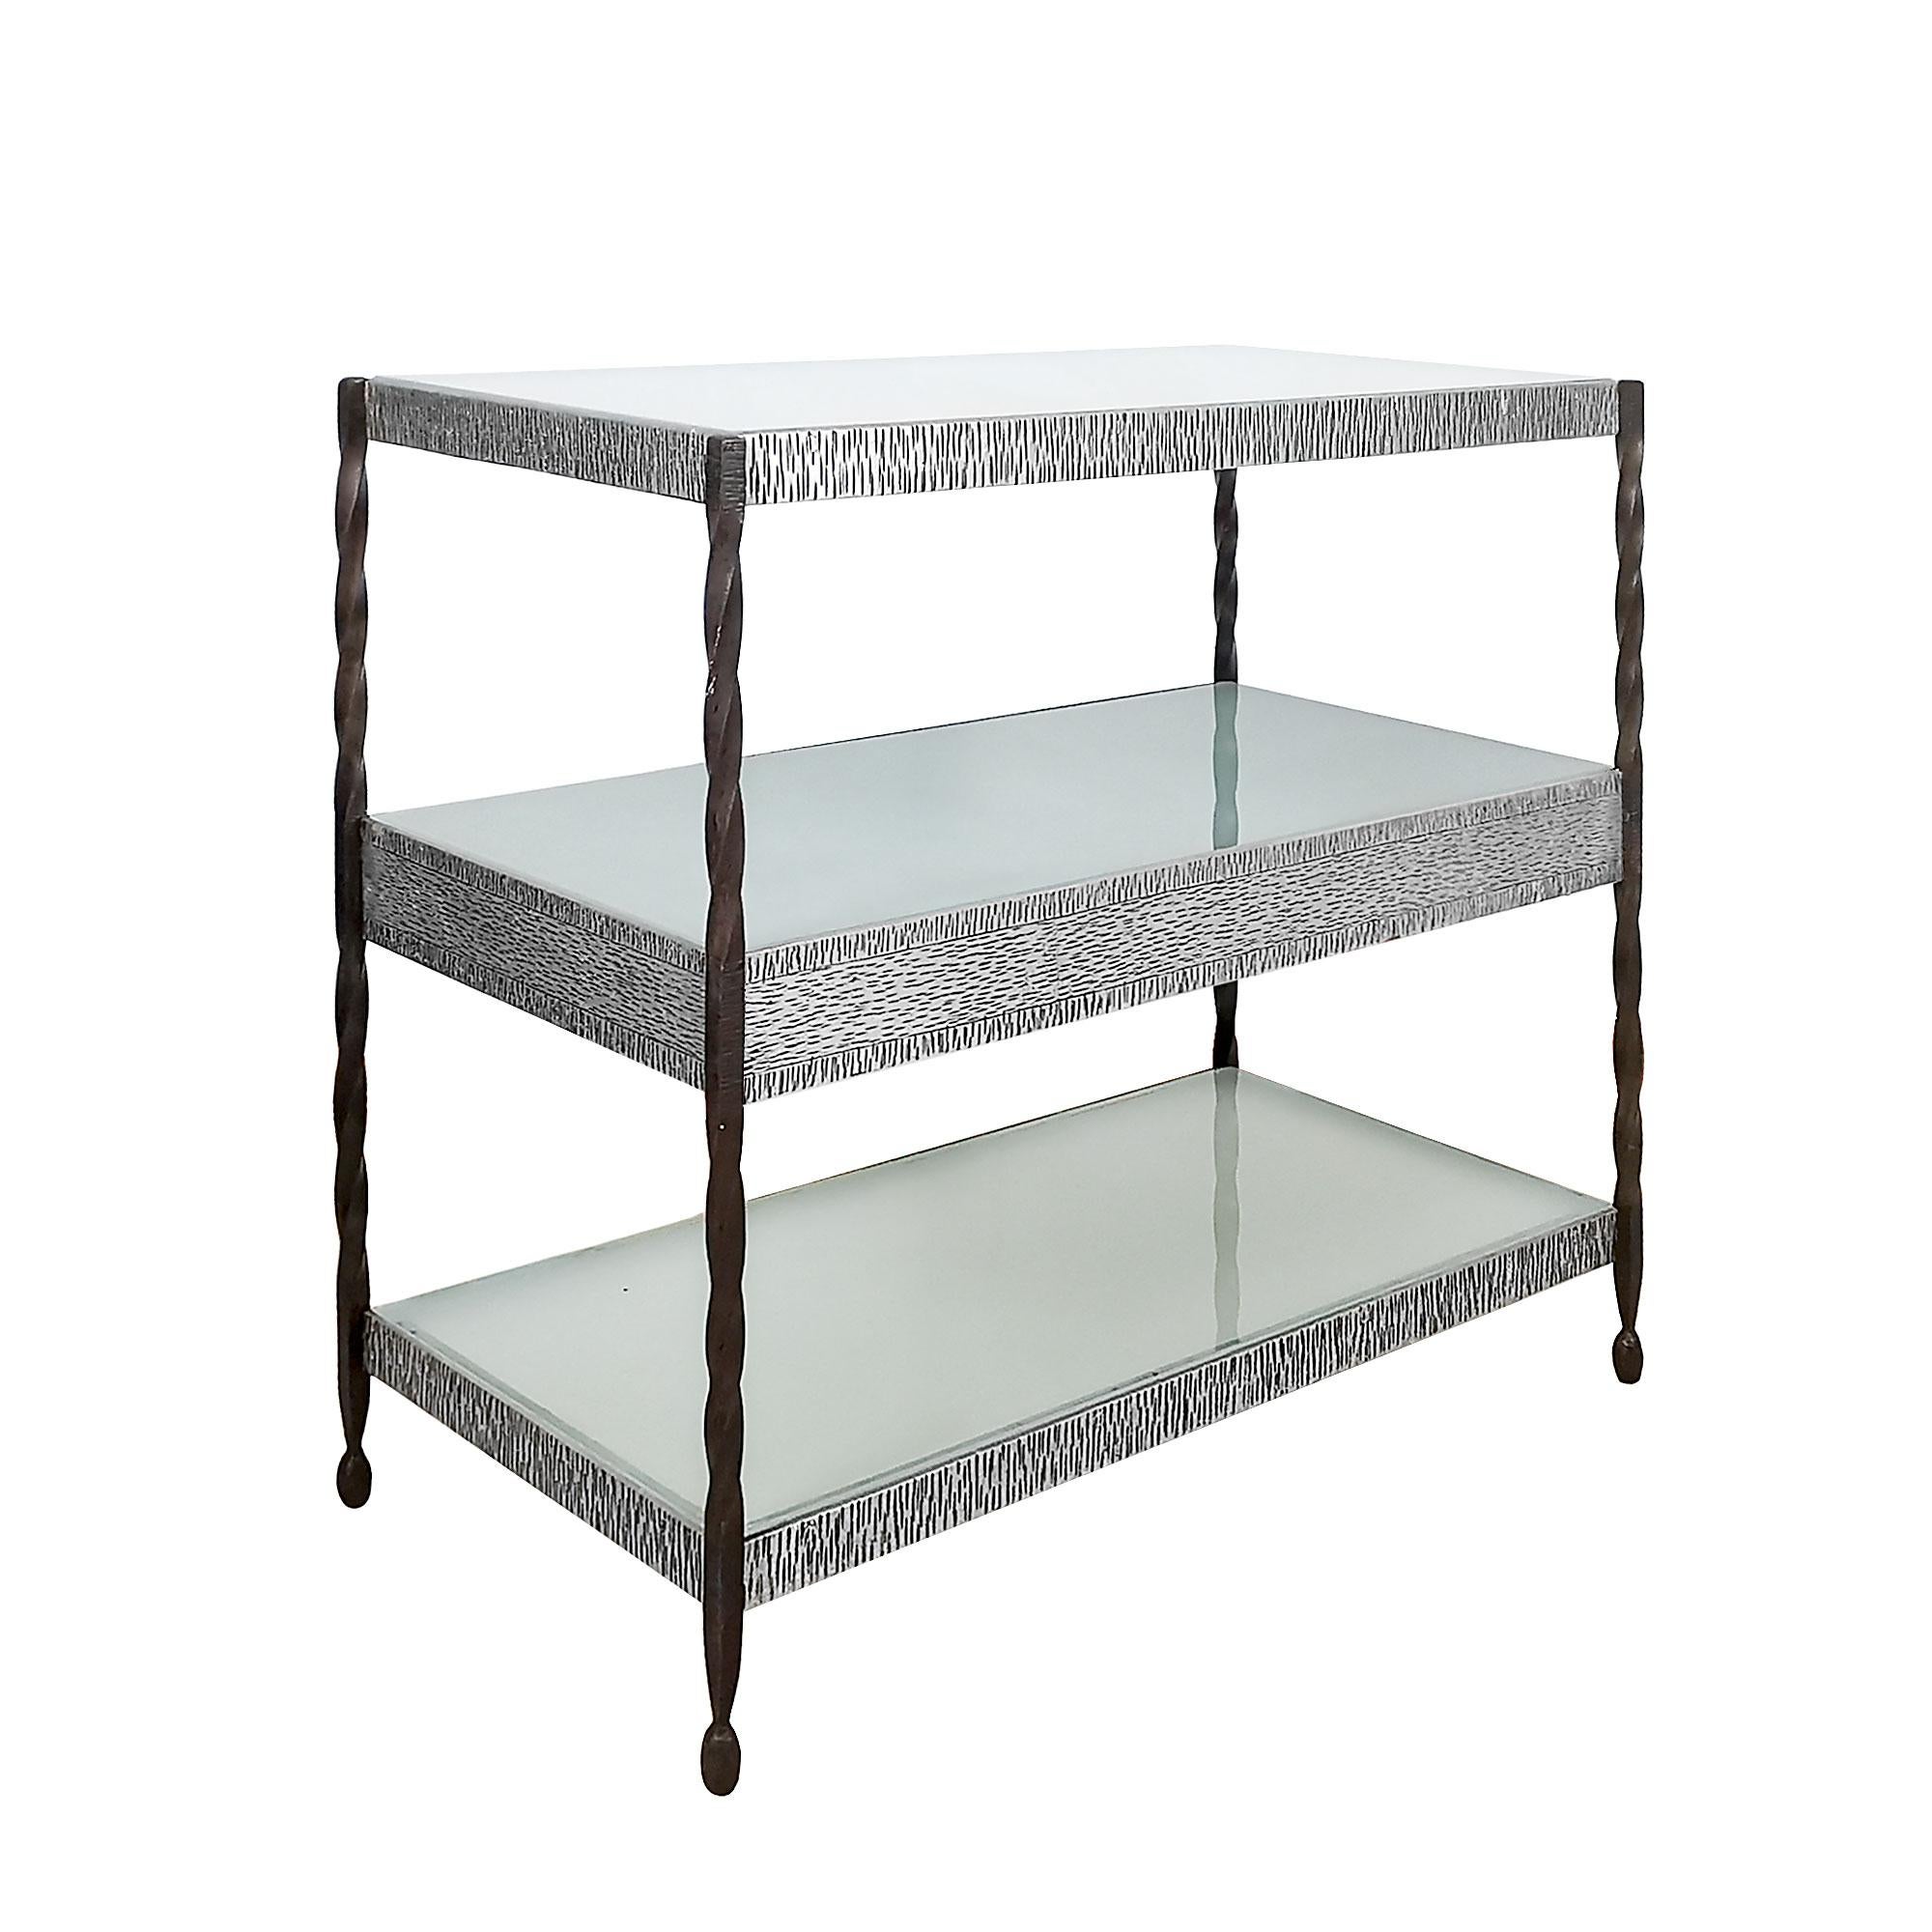 French Art Deco Center Shelving Unit, Wrought Iron, Metal, Brass and Glass - France For Sale